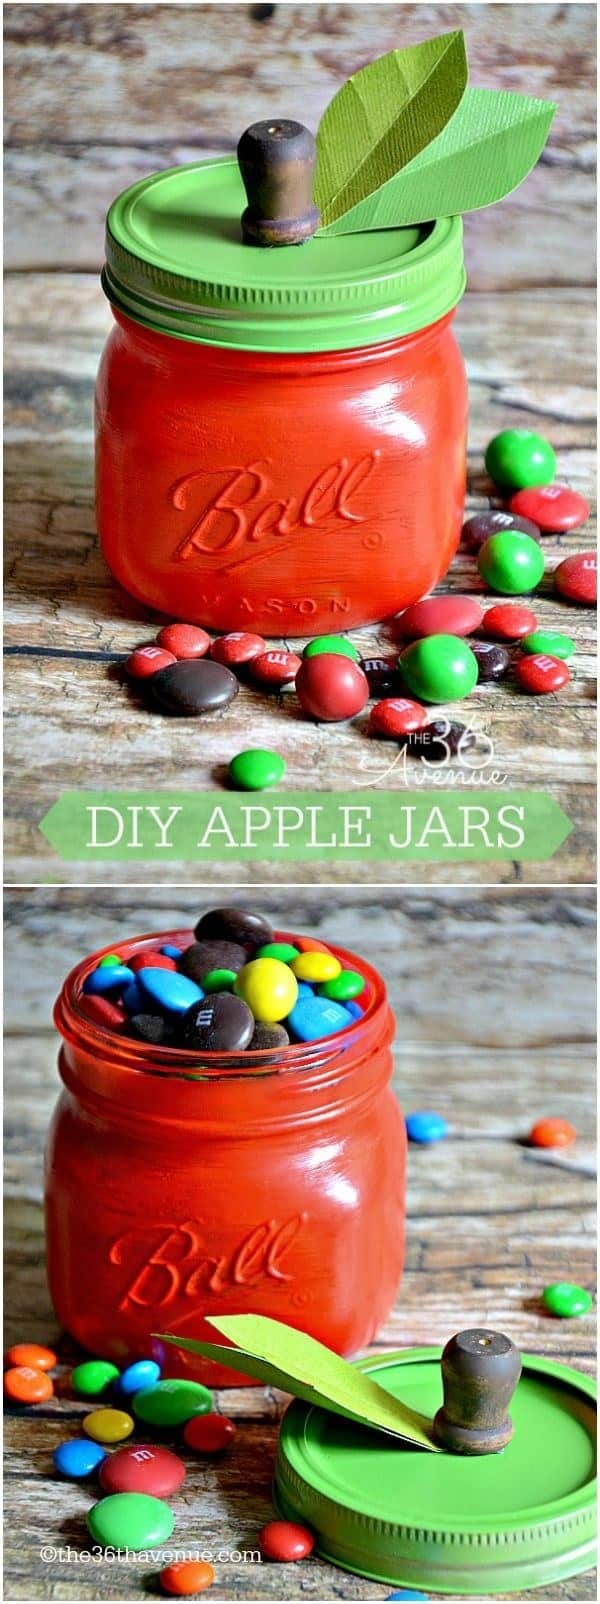 And just when you thought you were over mason jars....